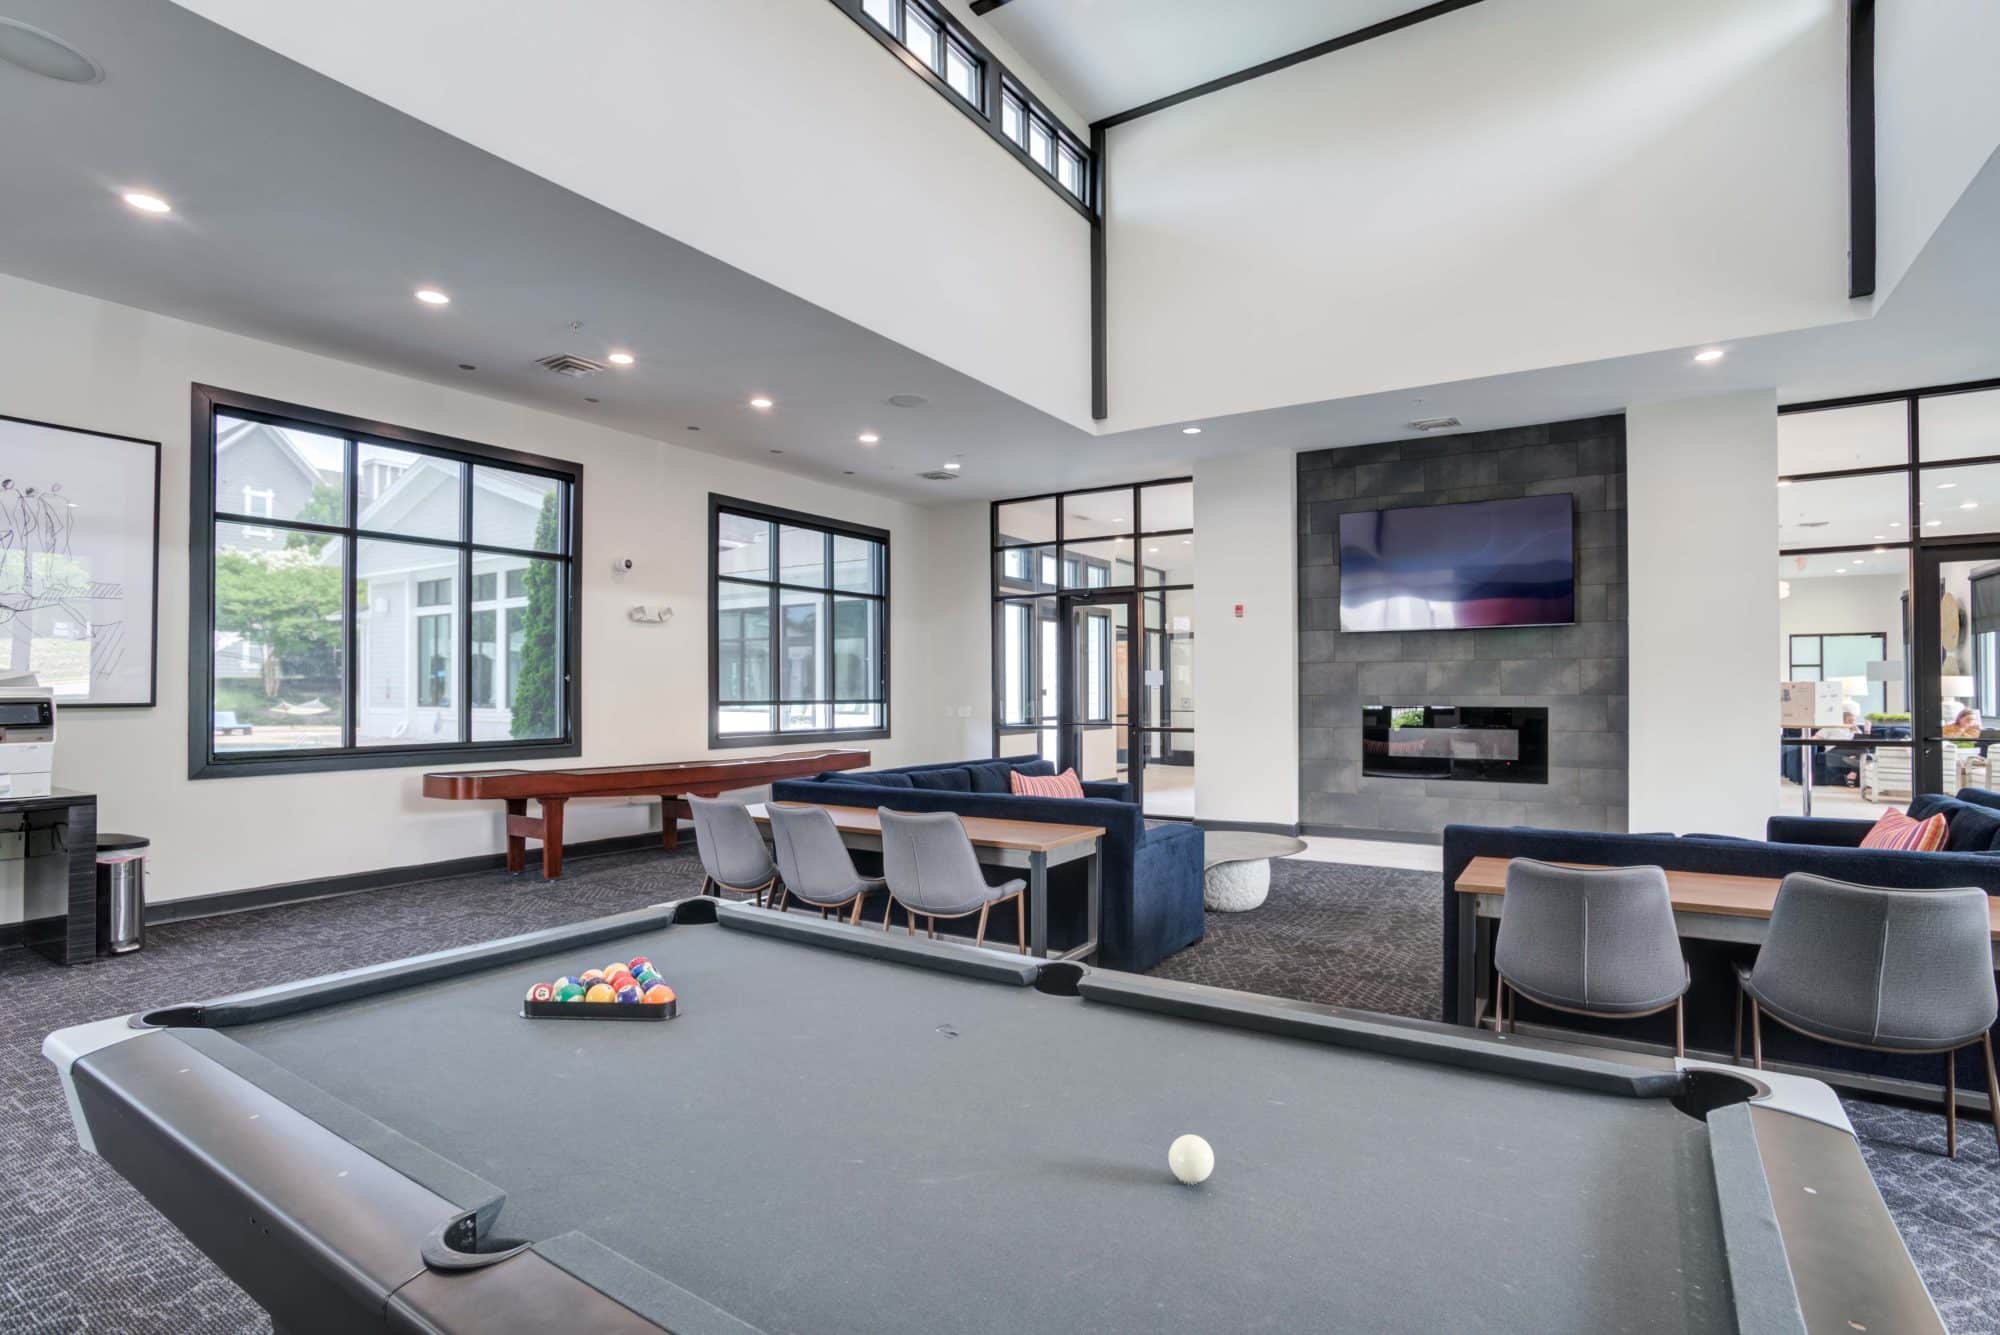 millennium one apartments near unc charlotte resident clubhouse pool table